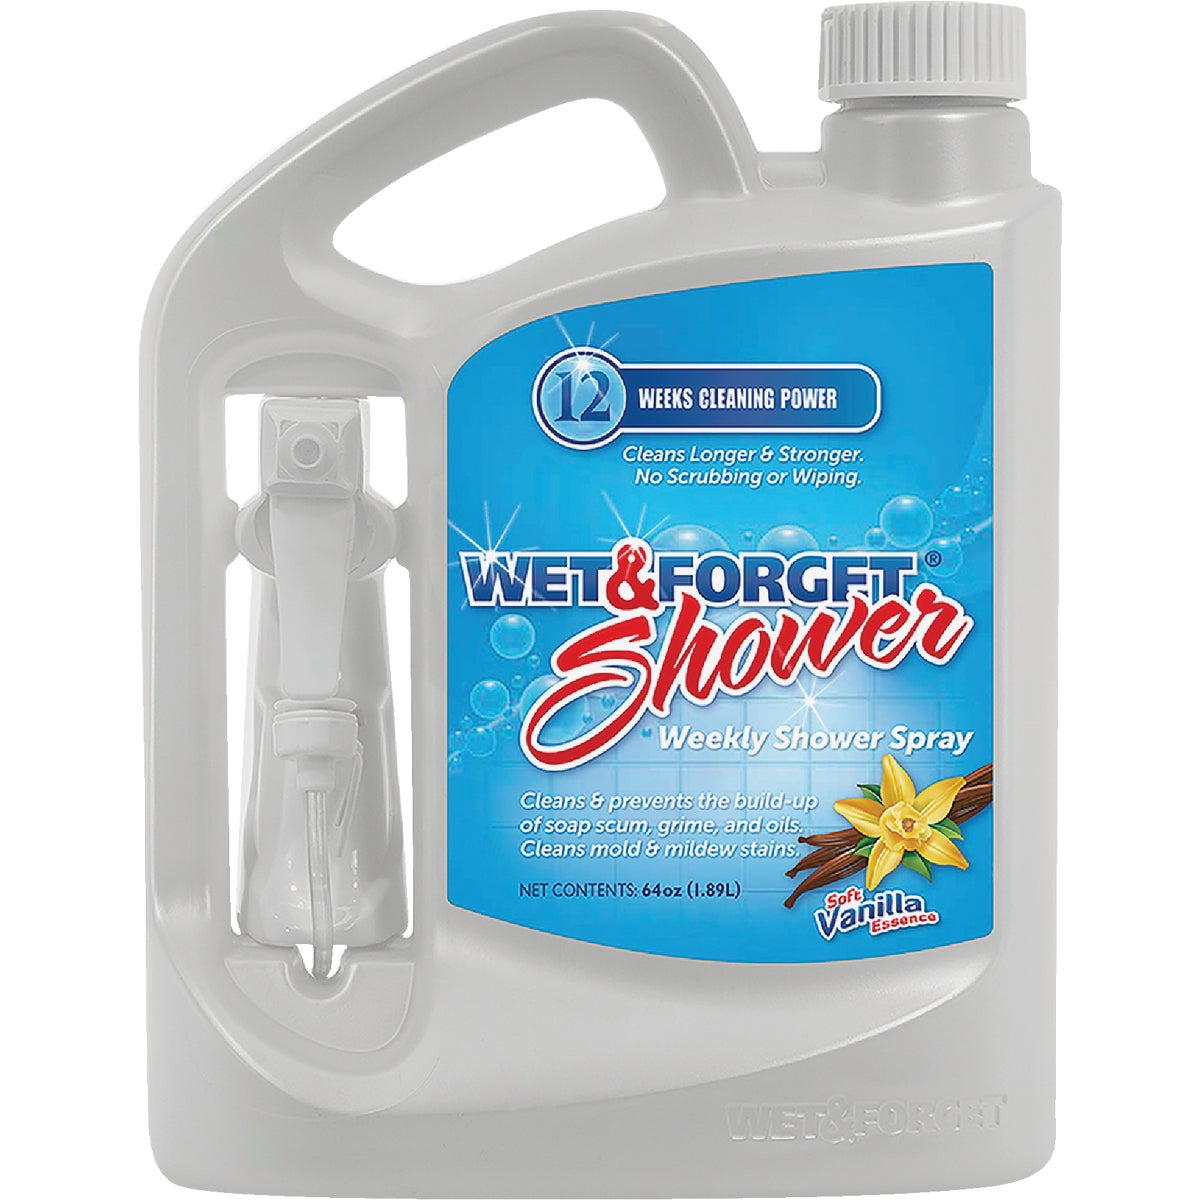 Item 600468, Cleans and prevents build up of soap scum, grime, and oils.